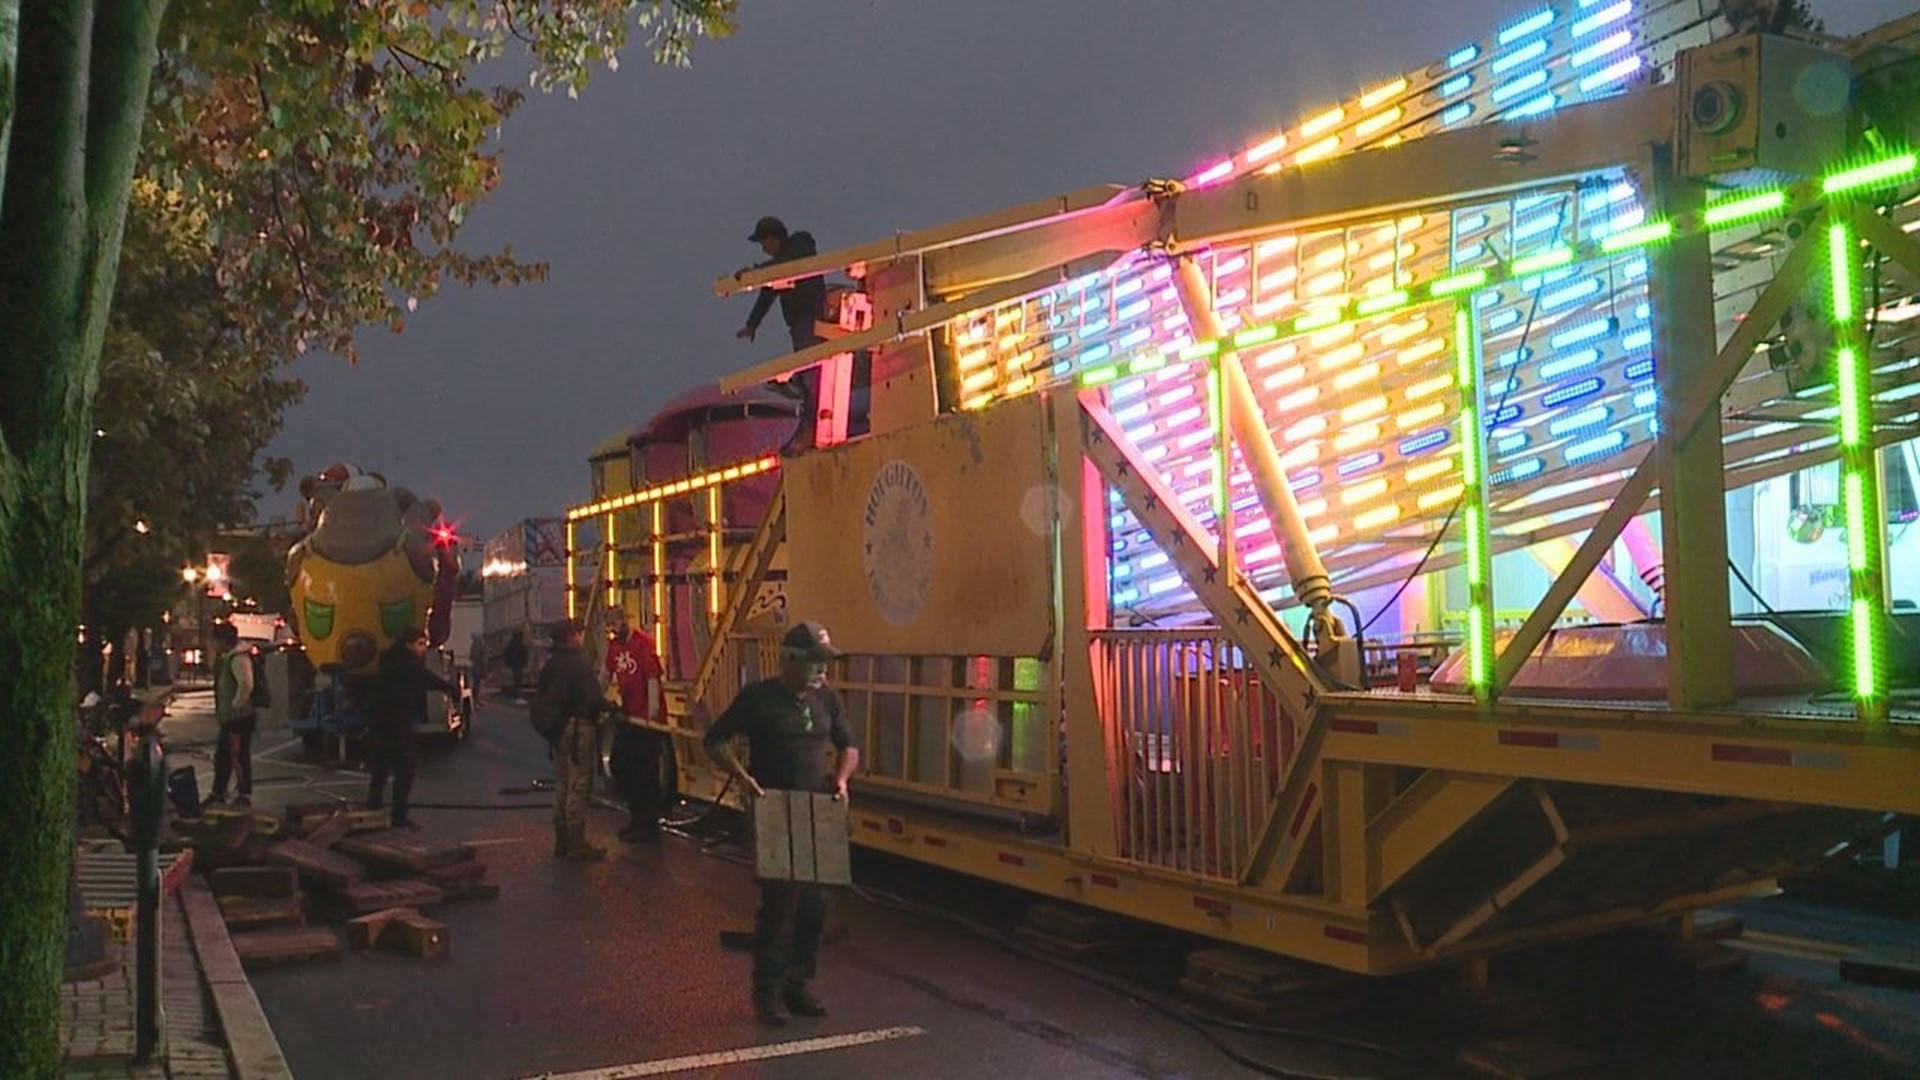 The 104th running of 'Pennsylvania's largest street fair' kicks off Tuesday despite the upcoming week of wet weather.